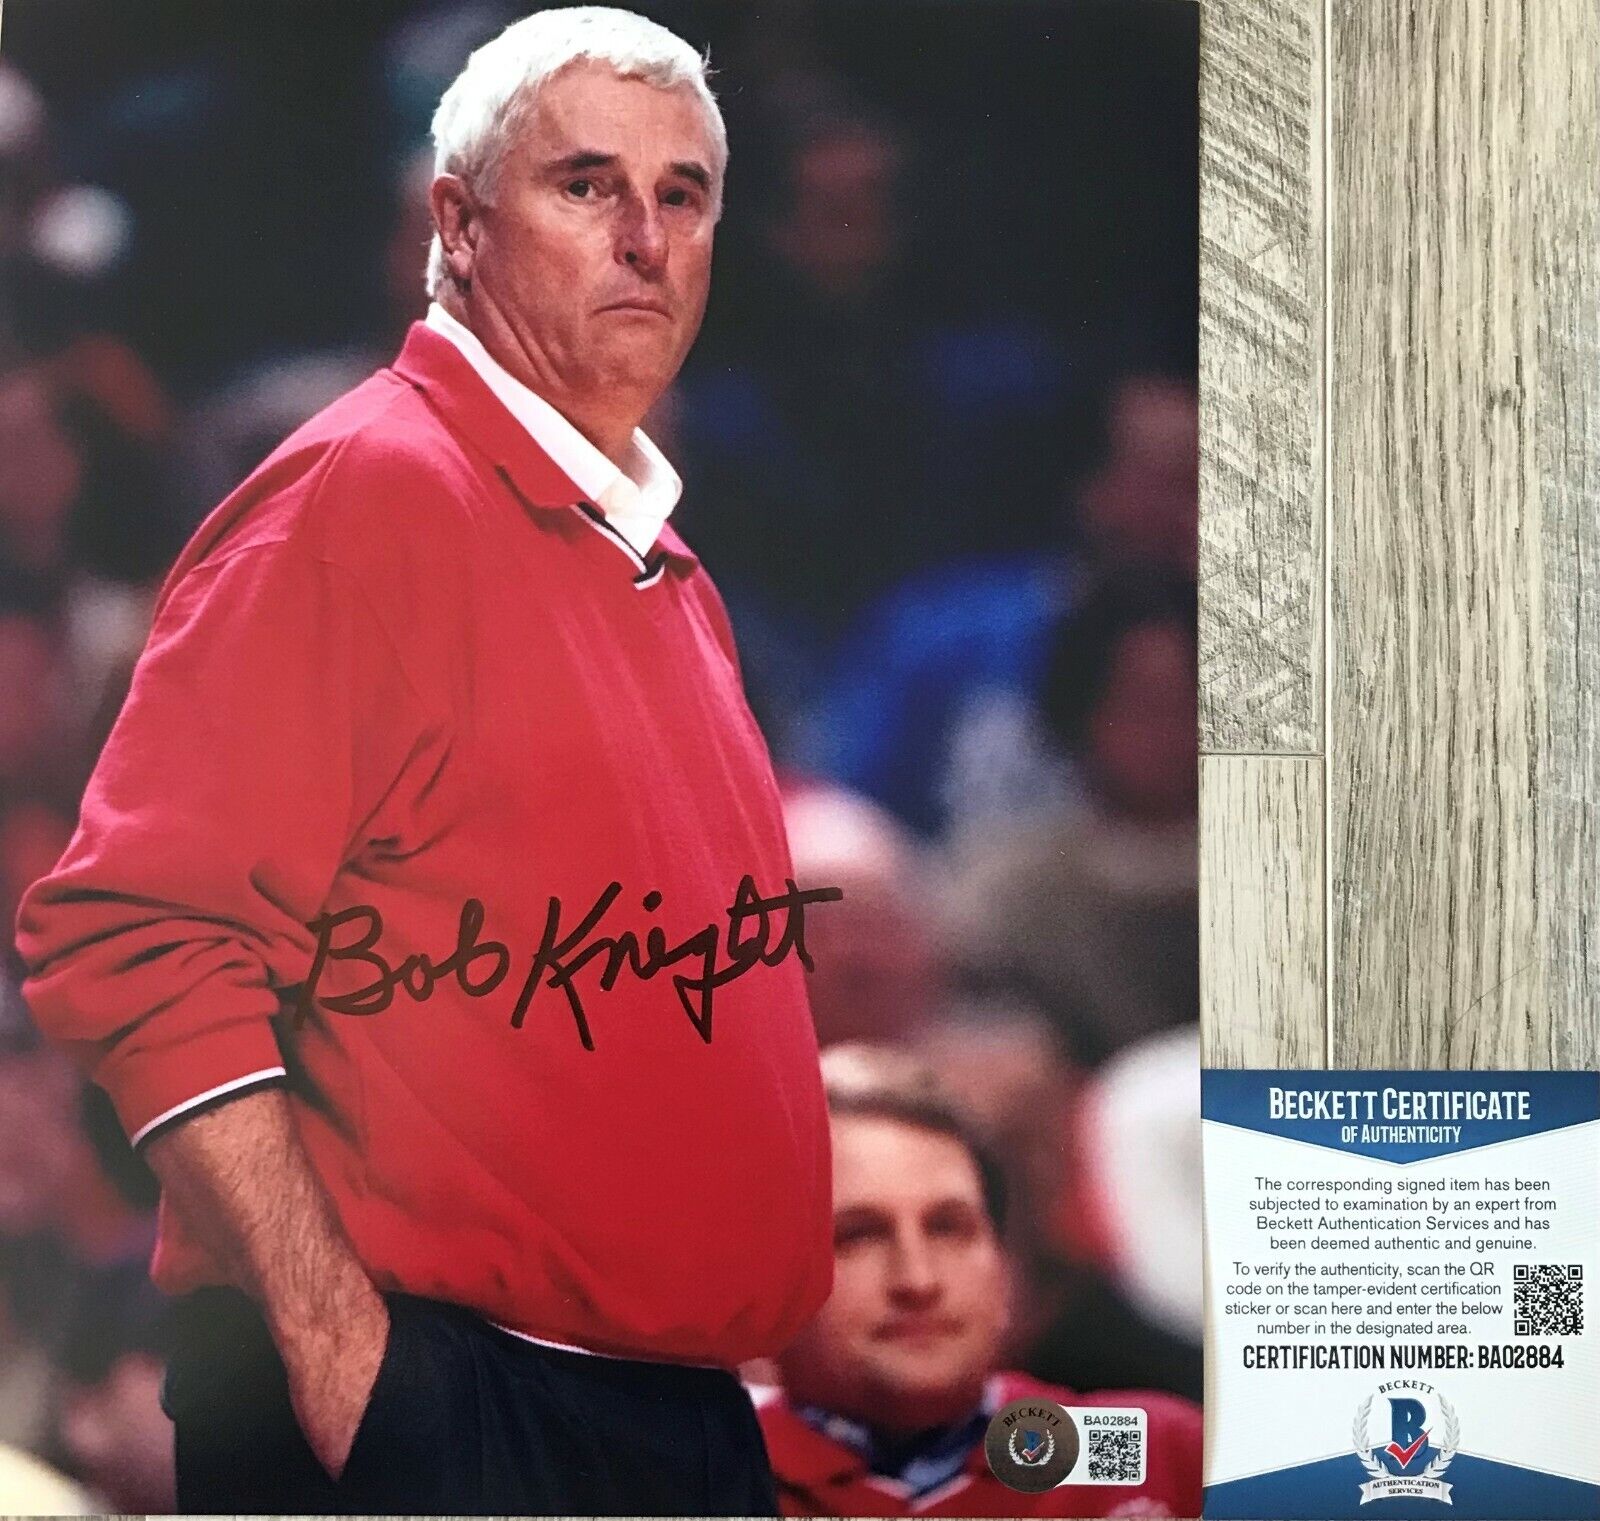 THE GENERAL Bob Knight Autographed Signed HOOSIERS NCAA 8x10 Photo Poster painting Beckett BAS